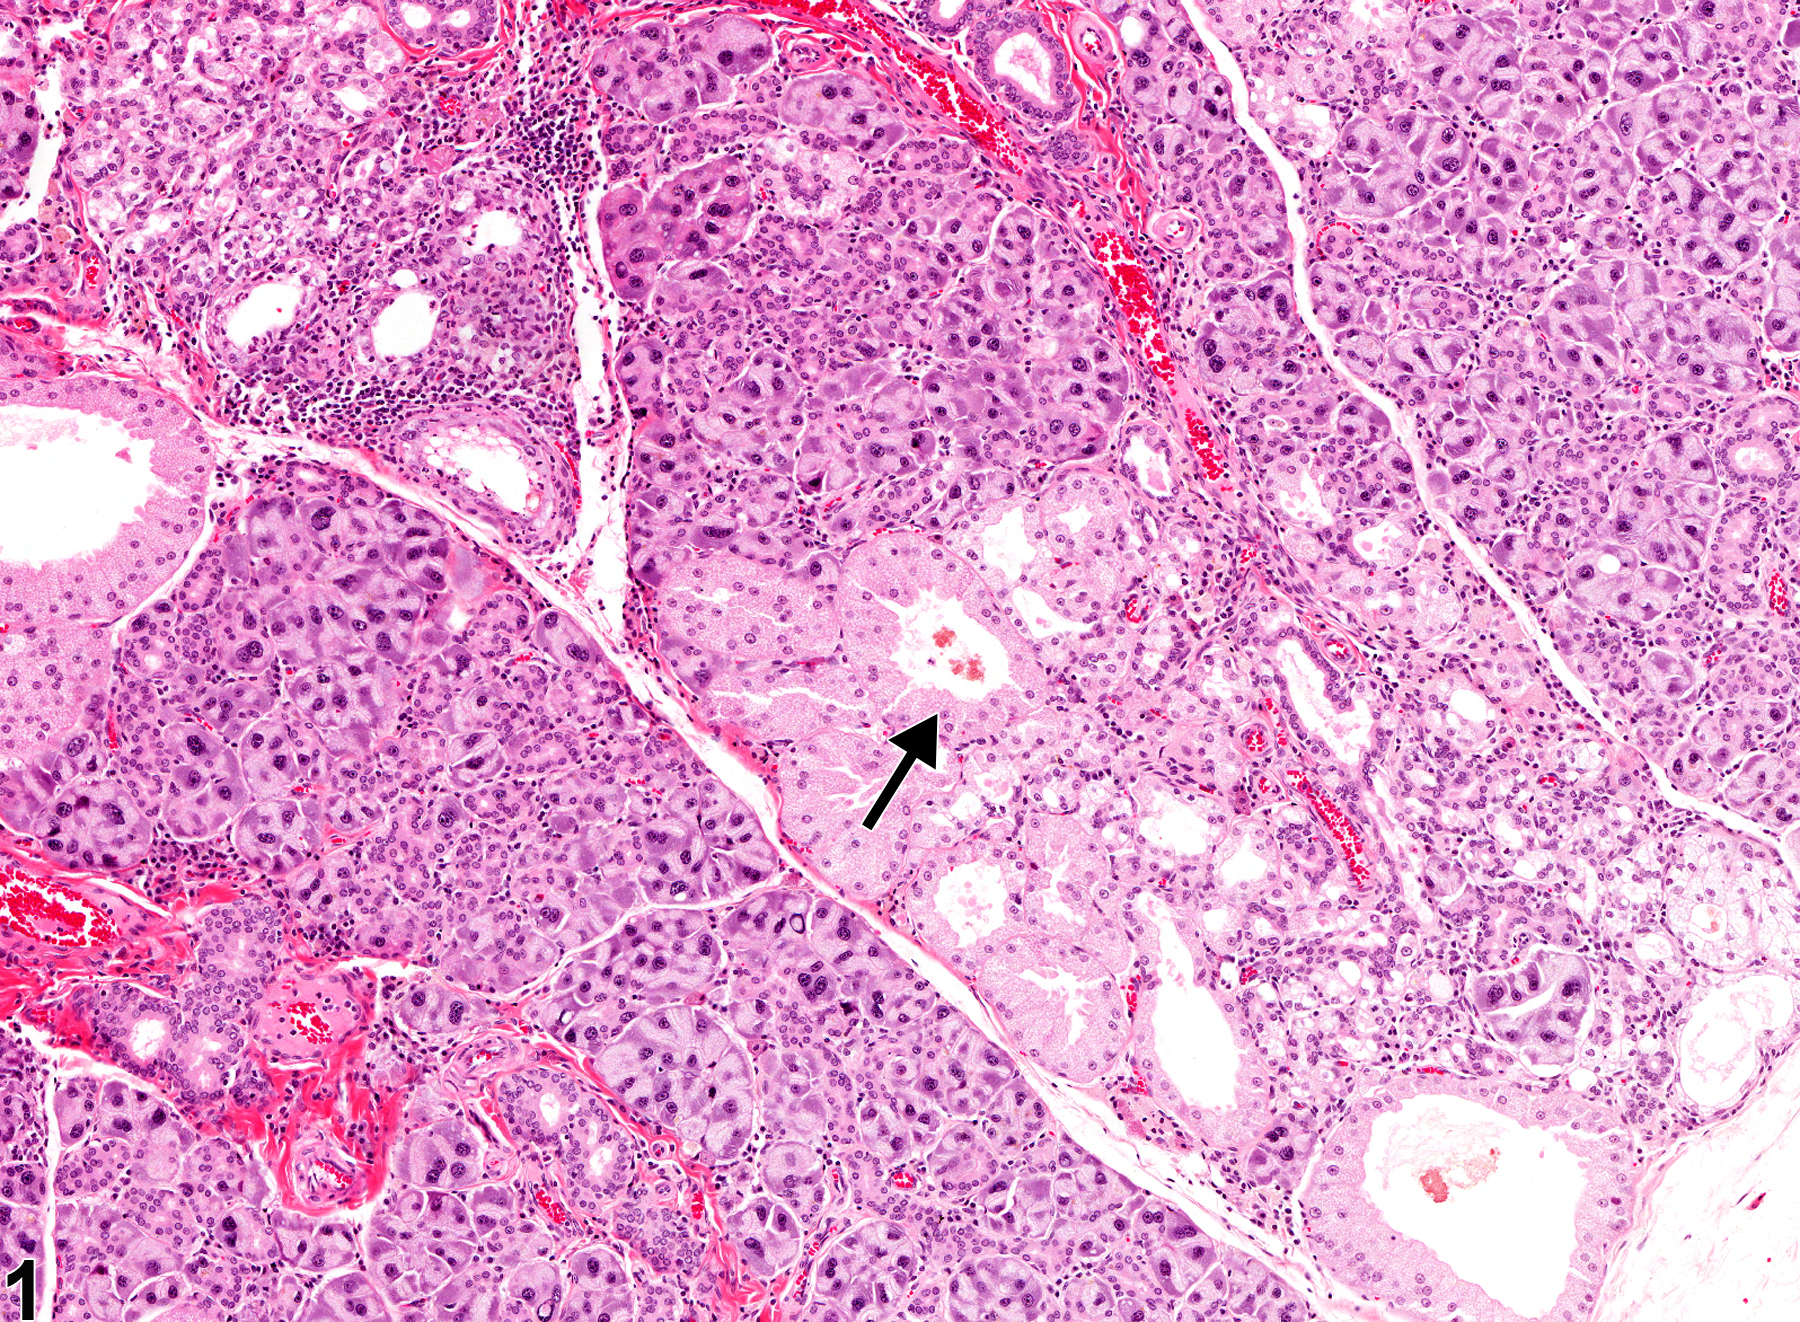 Image of metaplasia, harderian in the lacrimal gland from a male Osborne Mendel rat in a chronic study